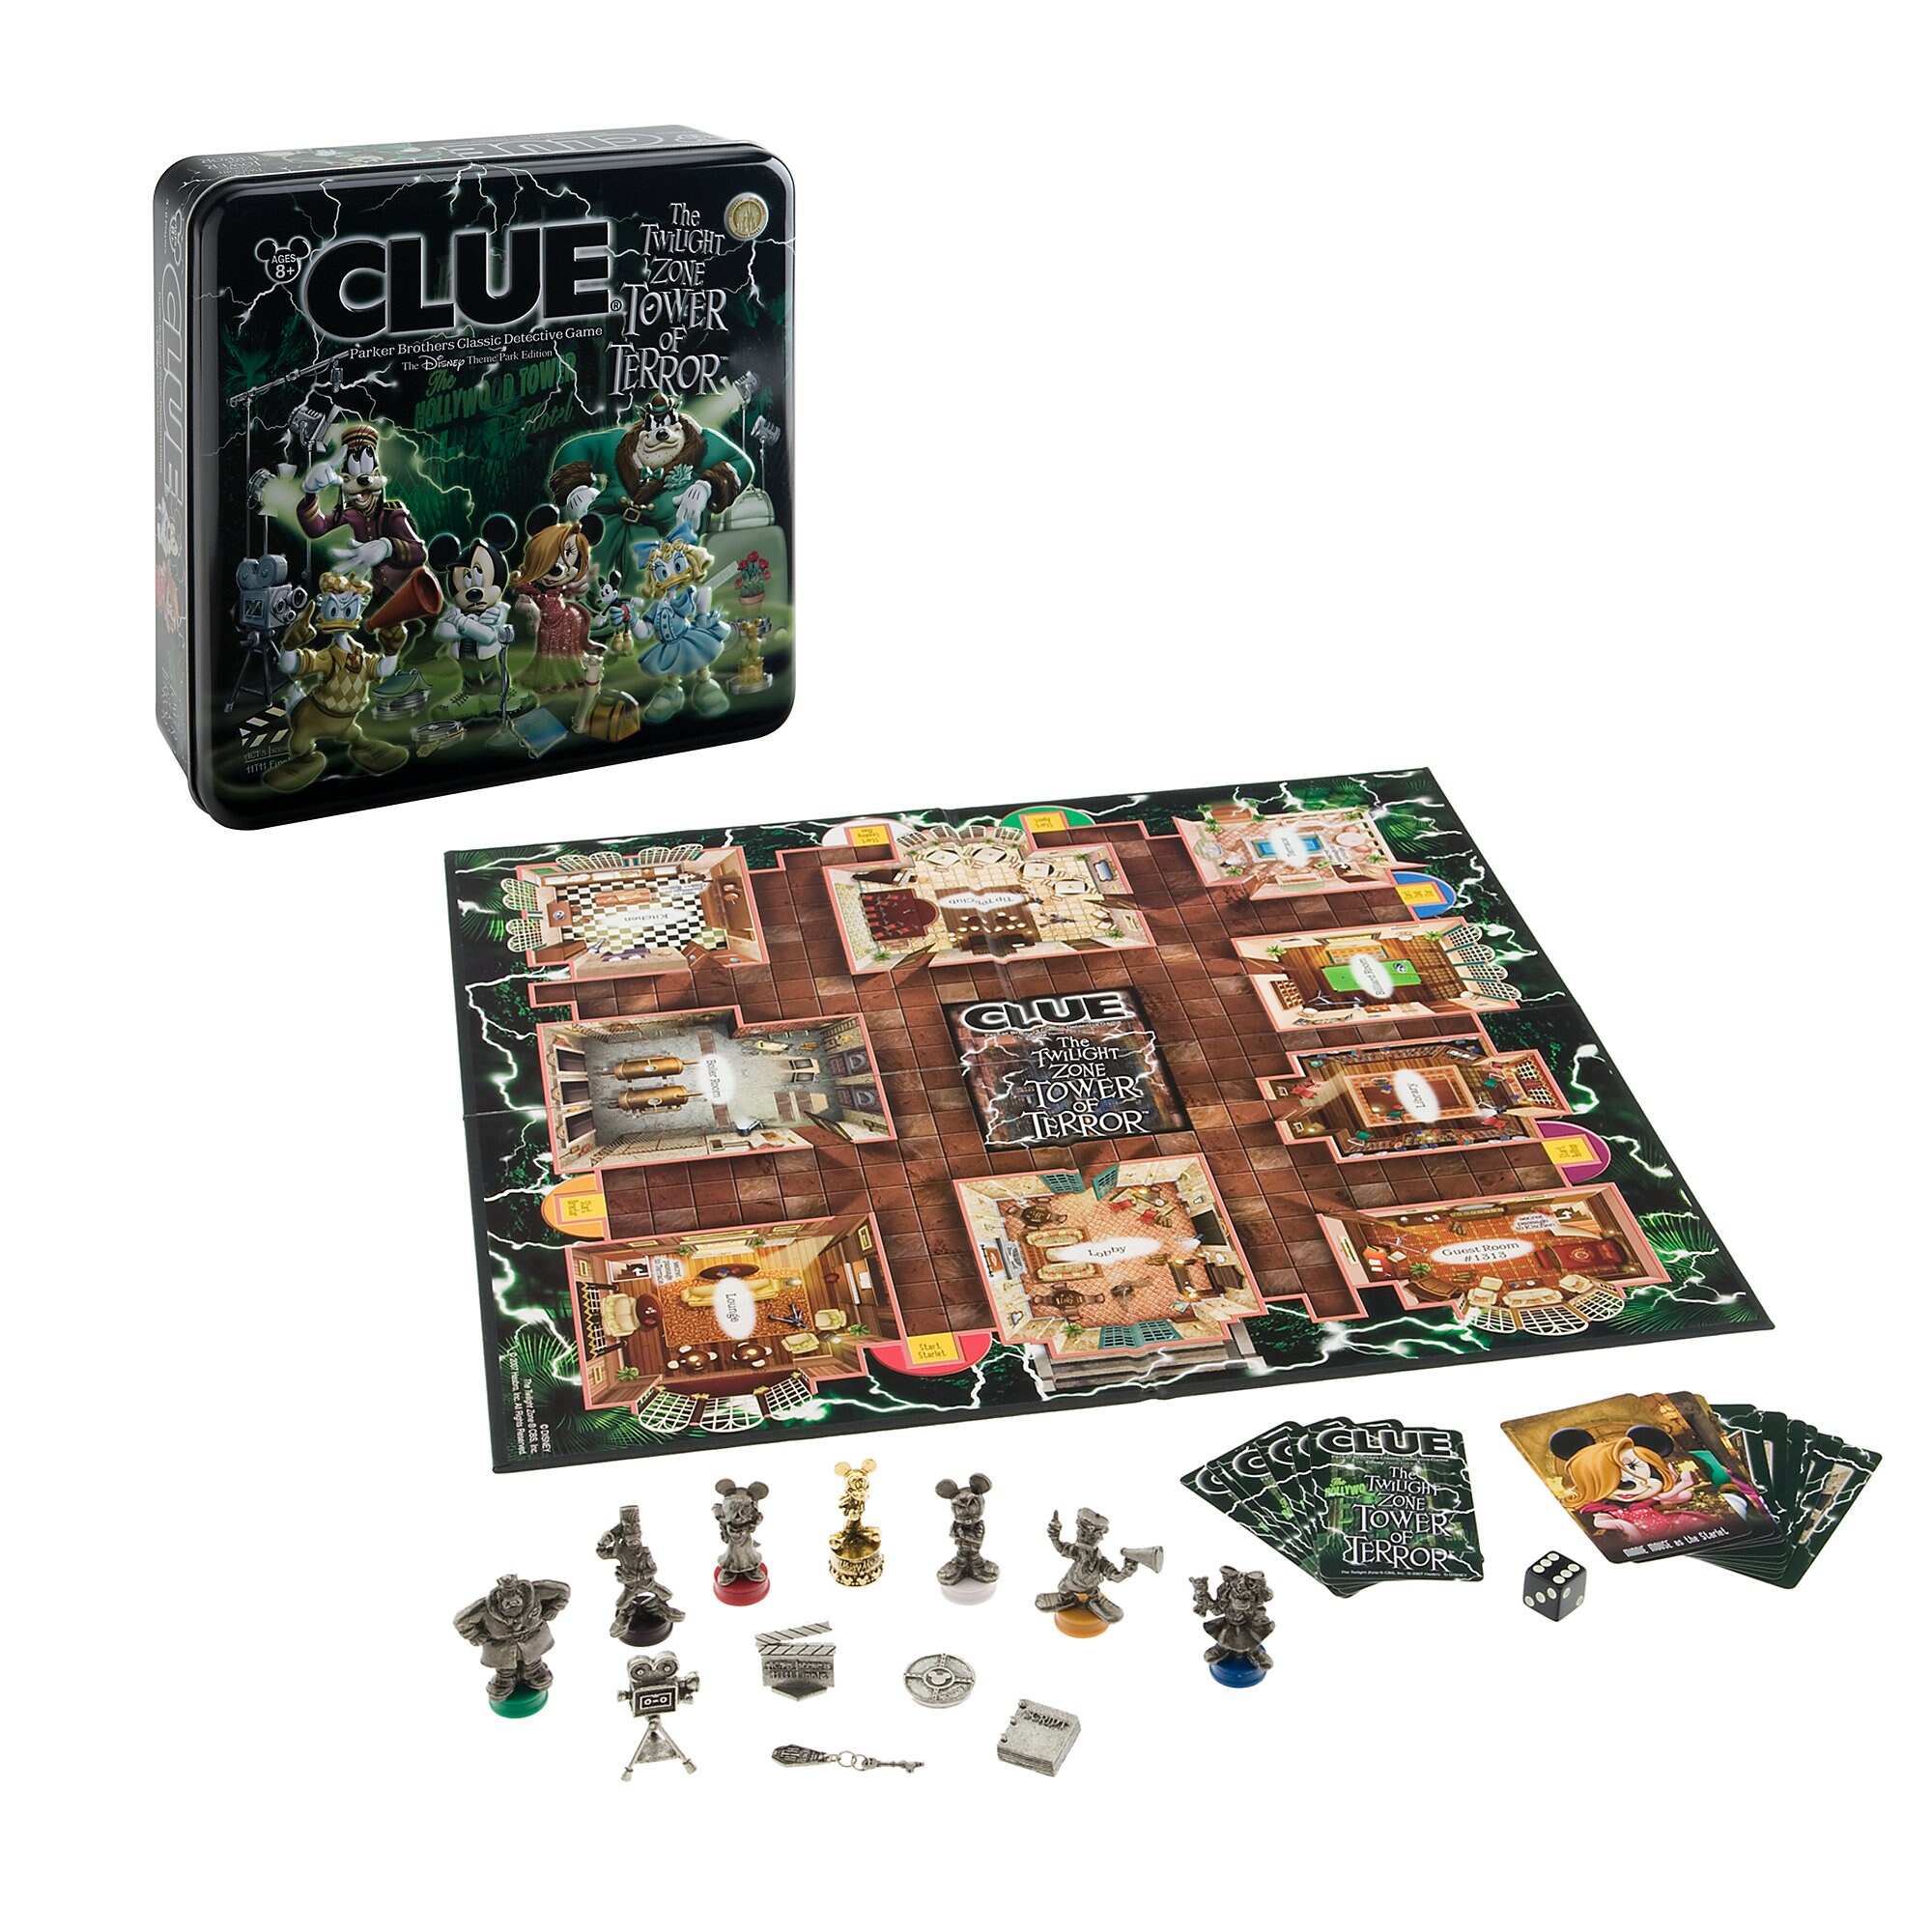 Clue® The Twilight Zone Tower of Terror™ Disney Theme Park Edition Game